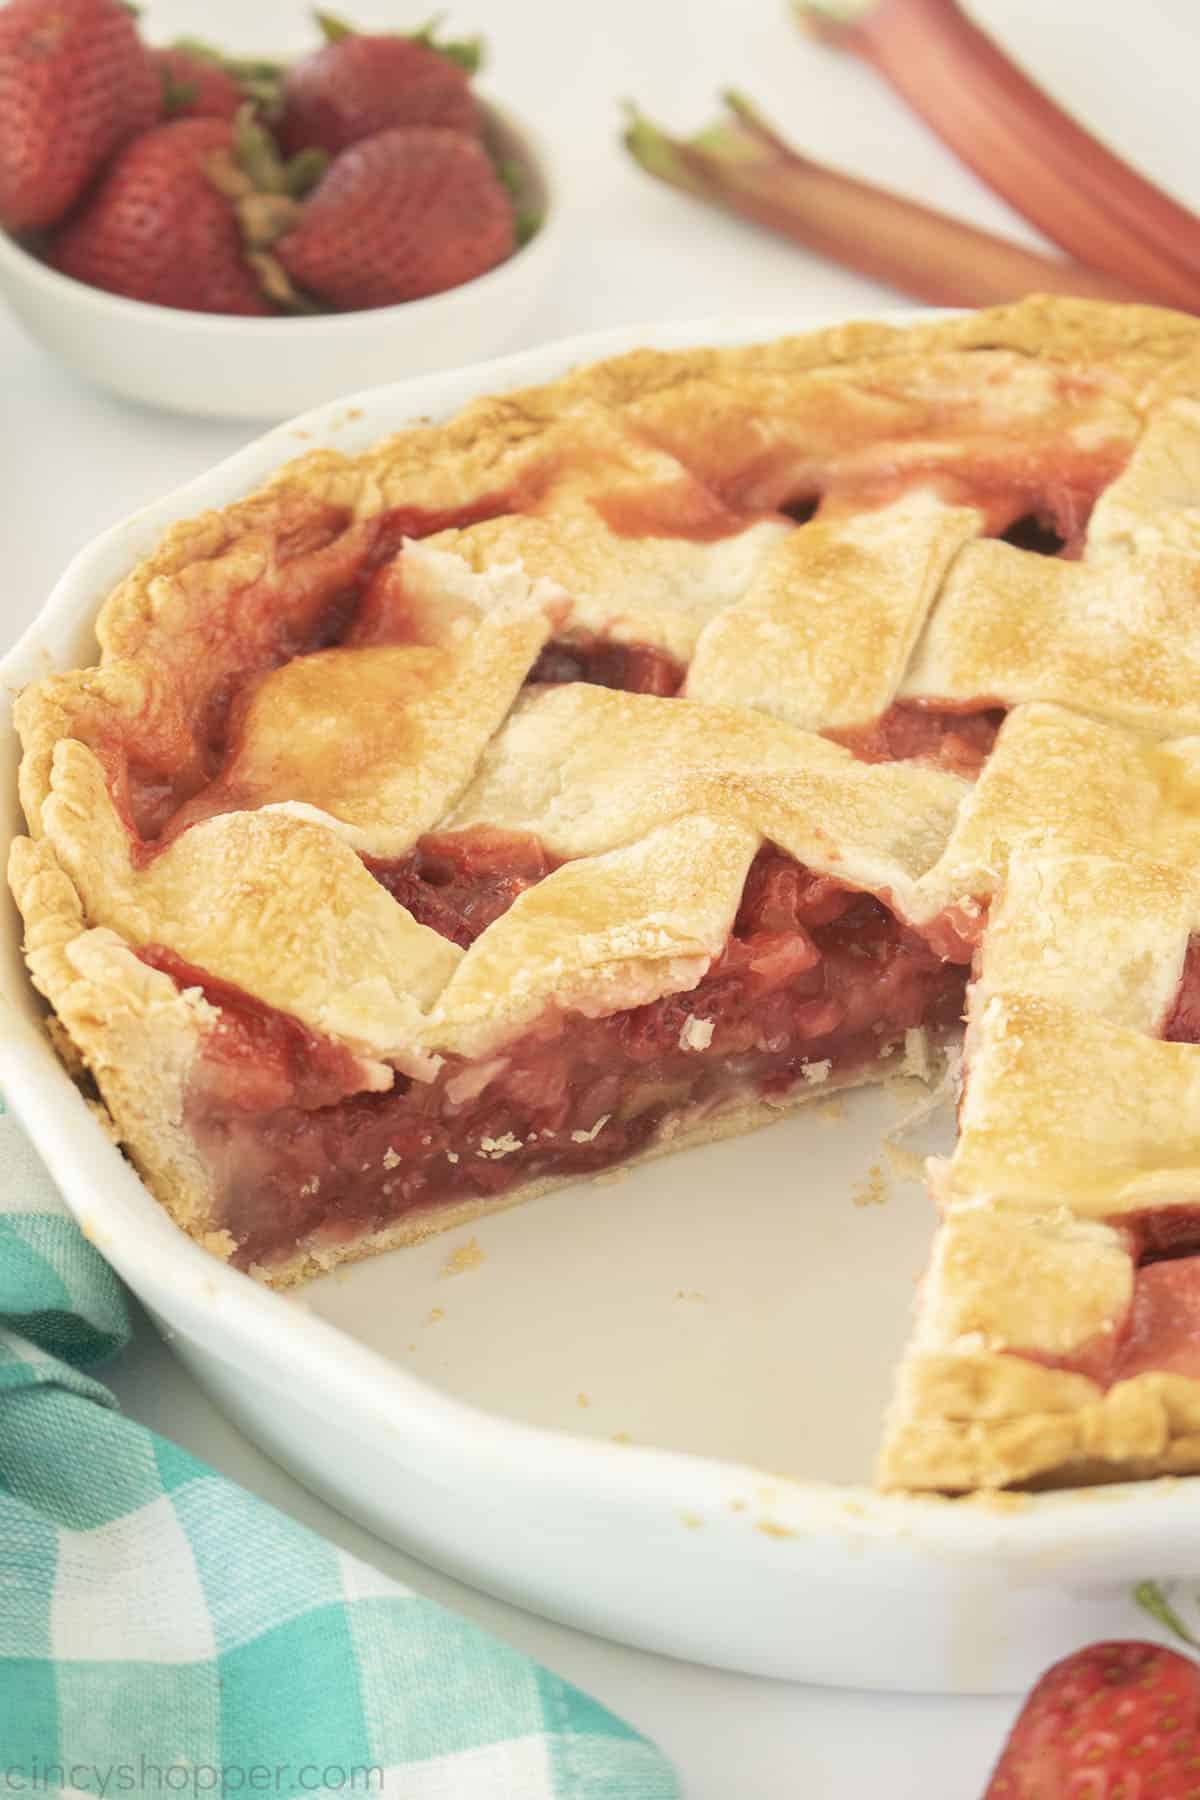 Whole Lattice topped rhubarb Pie with Strawberries one slice missing.